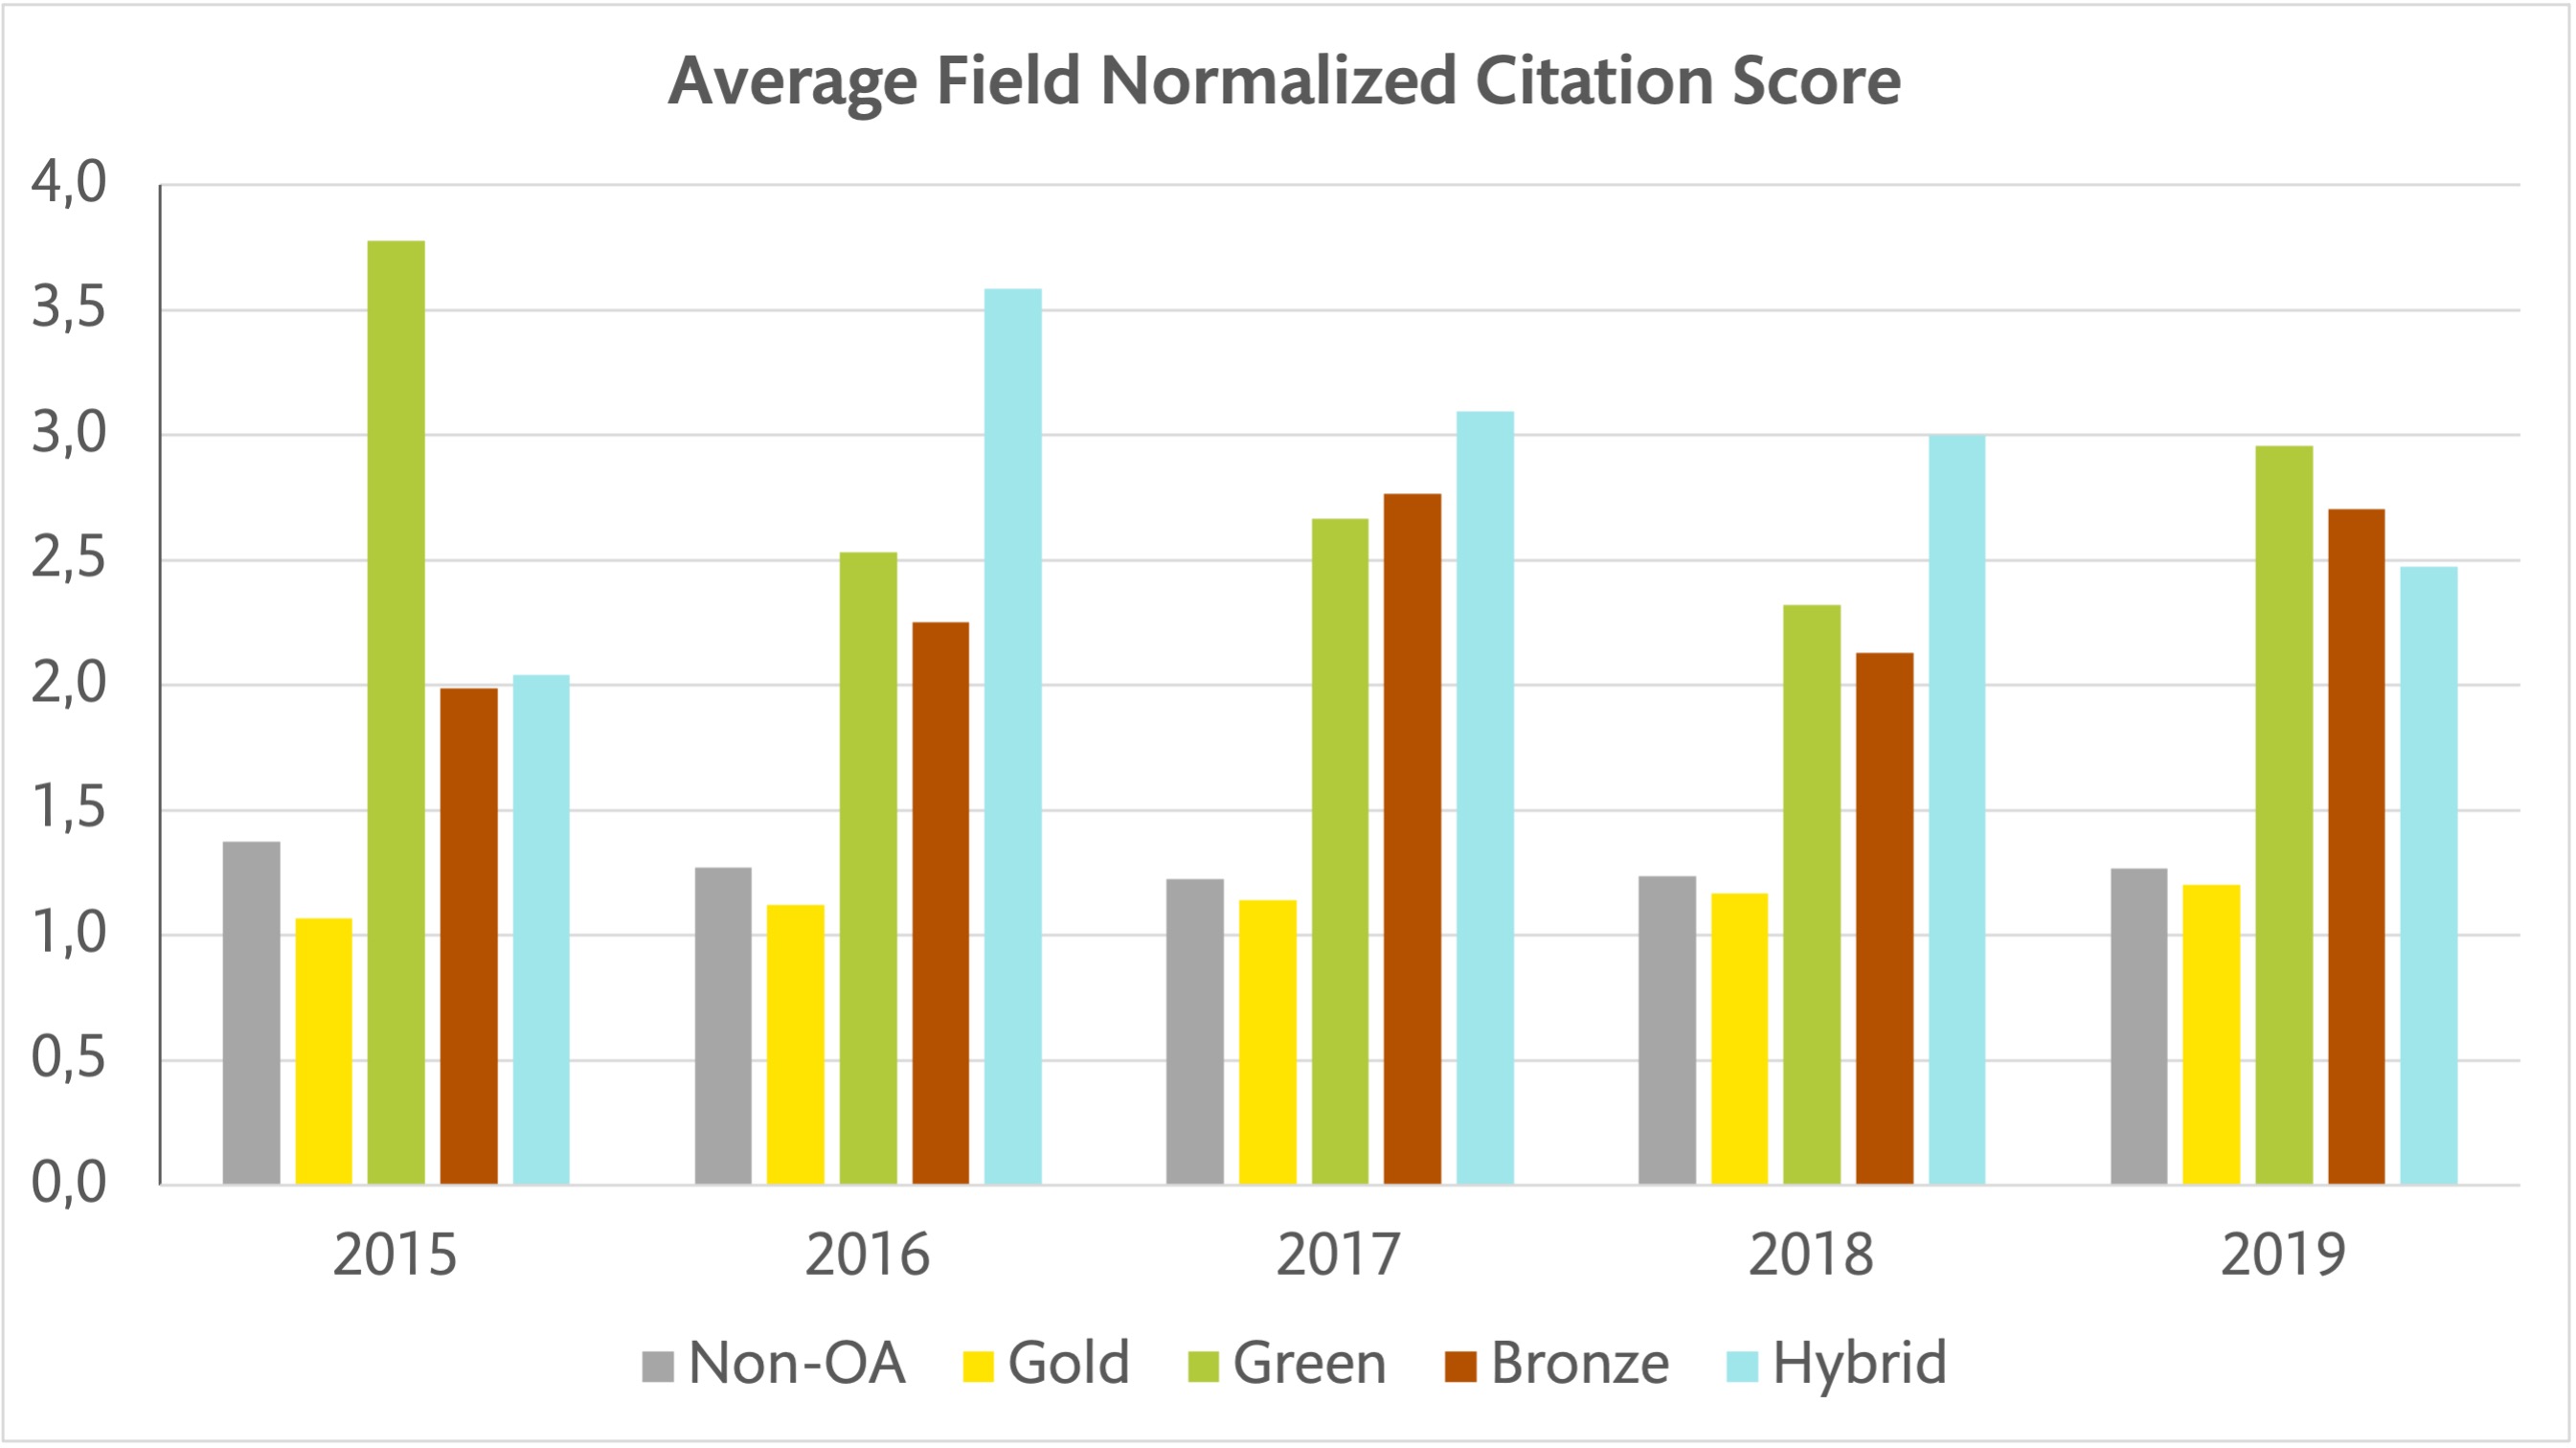 Average field normalized citation score for KI publications 2015-2019 by OA type (gold, green, bronze, hybrid and non-OA). In general, average field normalized citation score is notably higher for hybrid, green and bronze OA than gold and non-OA.